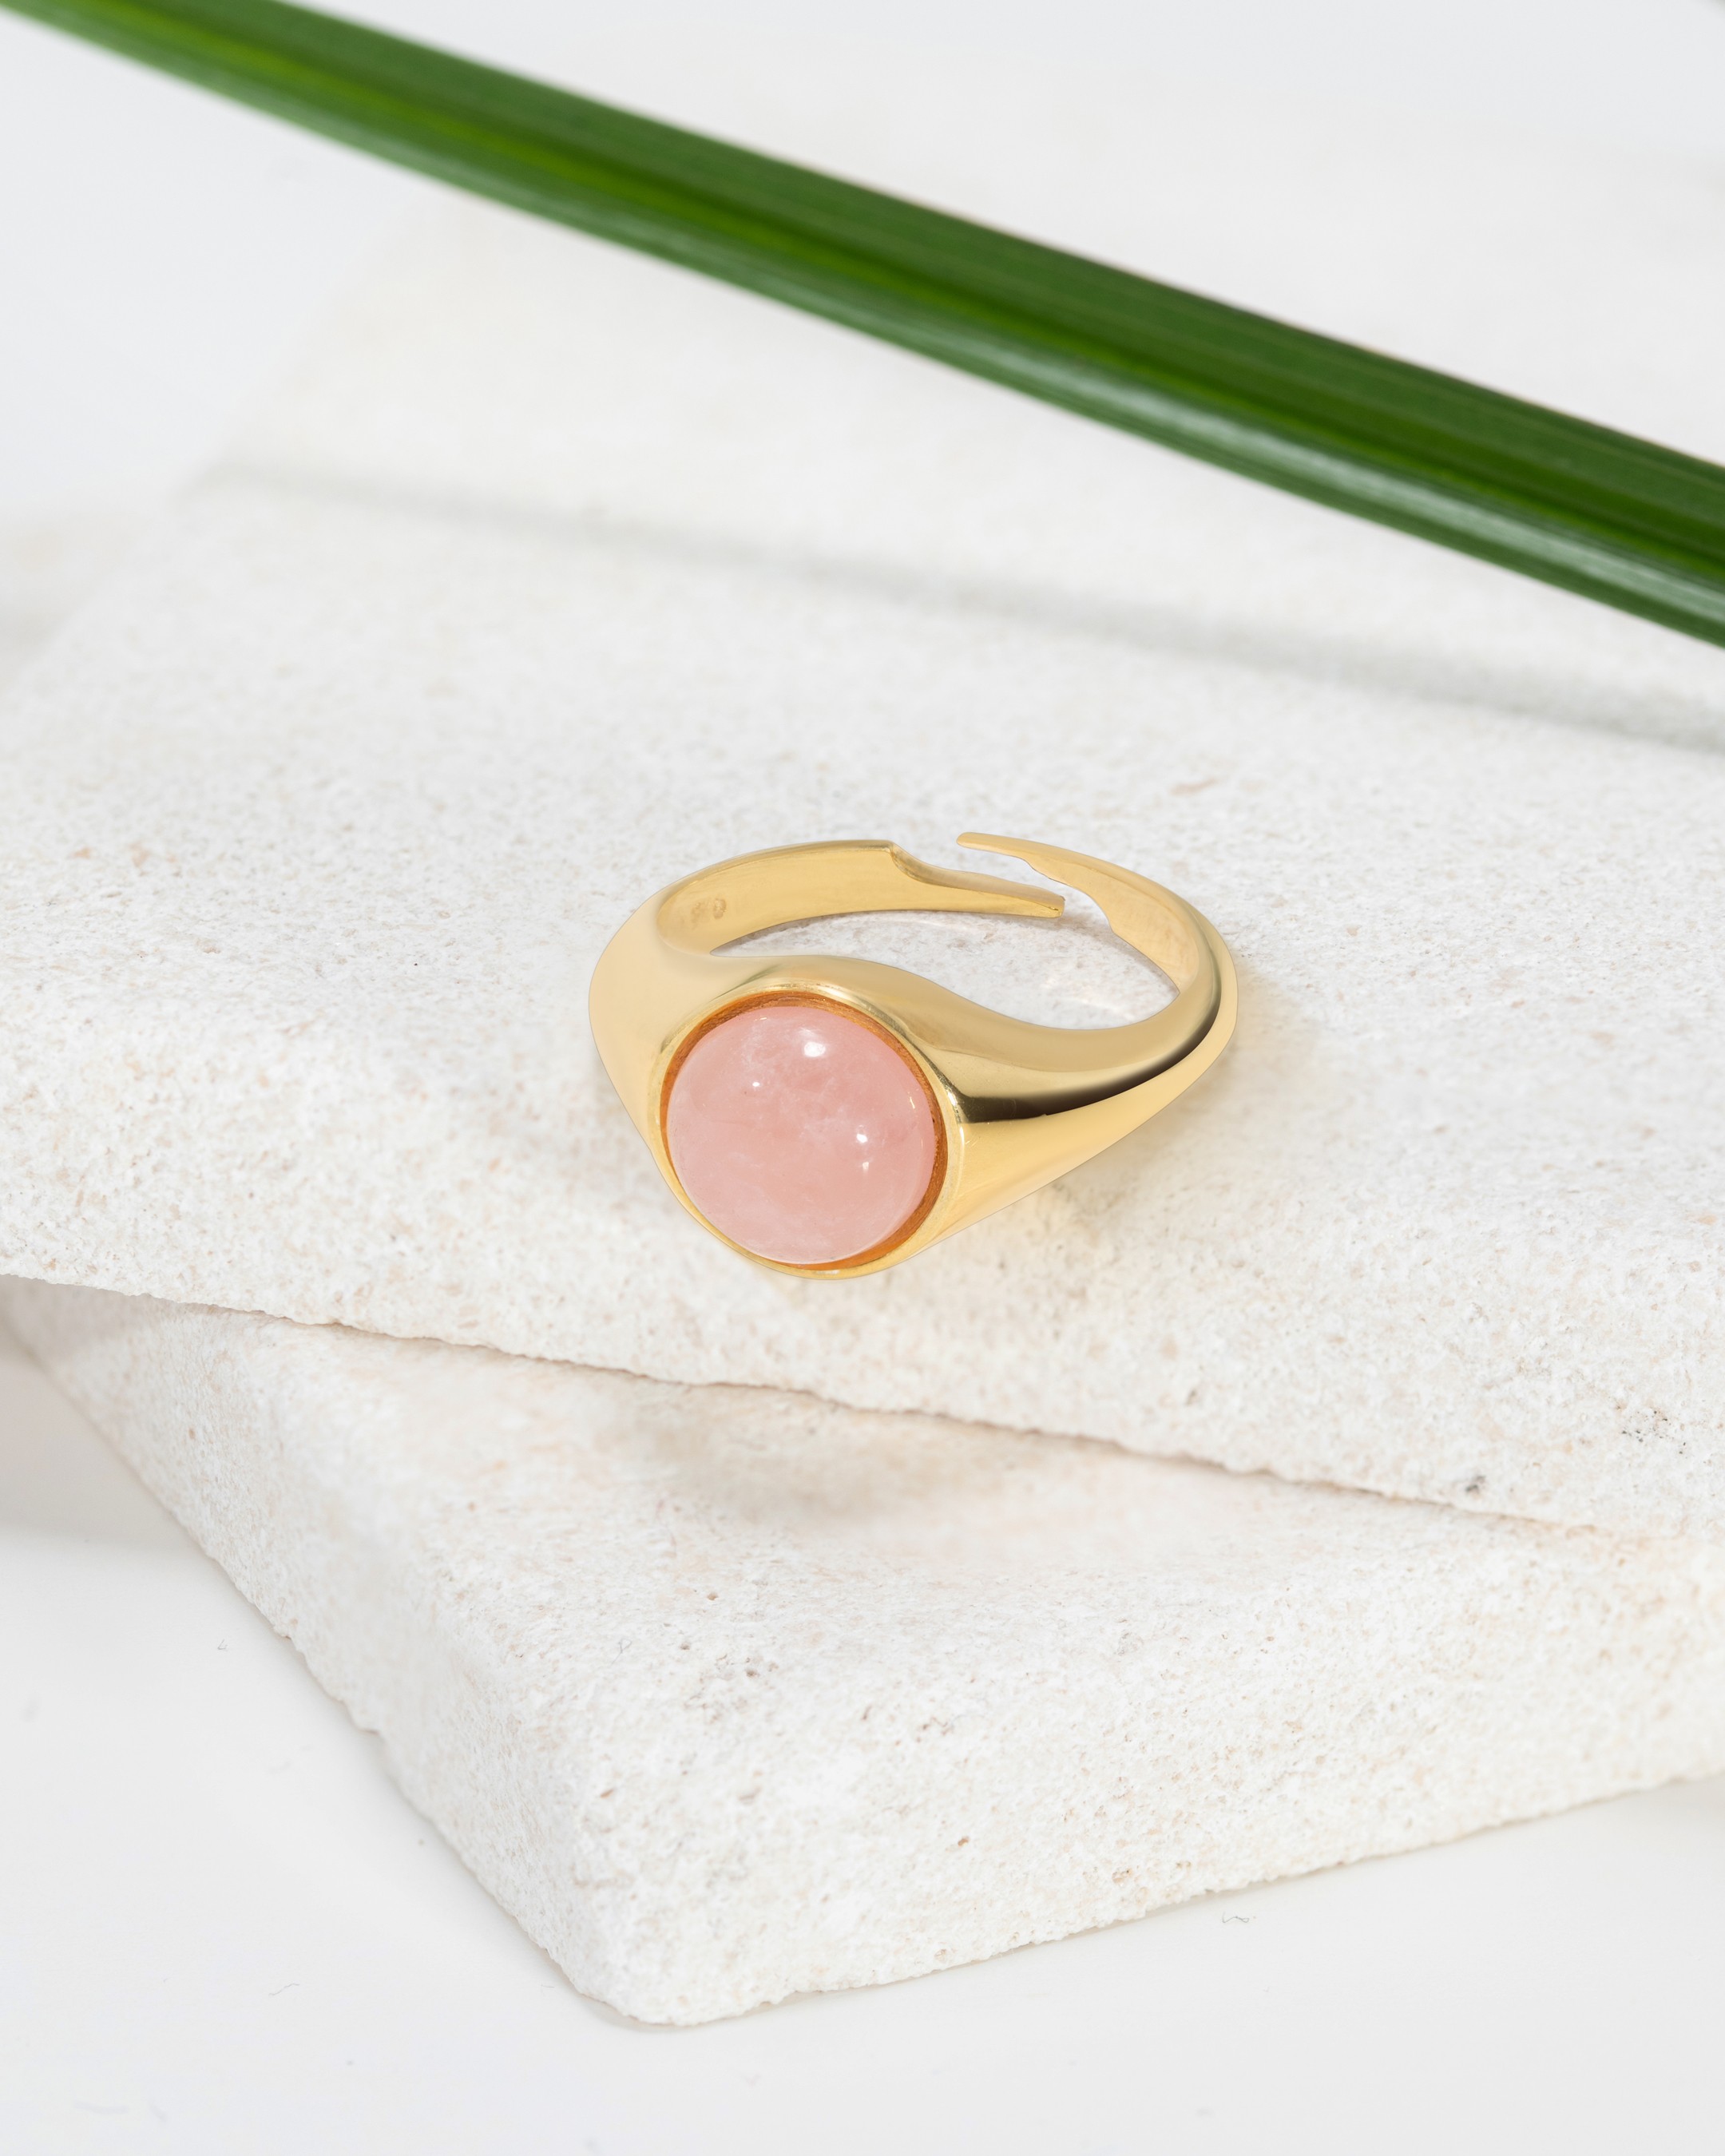 Silver Calypso Ring with Pink Quartz Stones - Gold